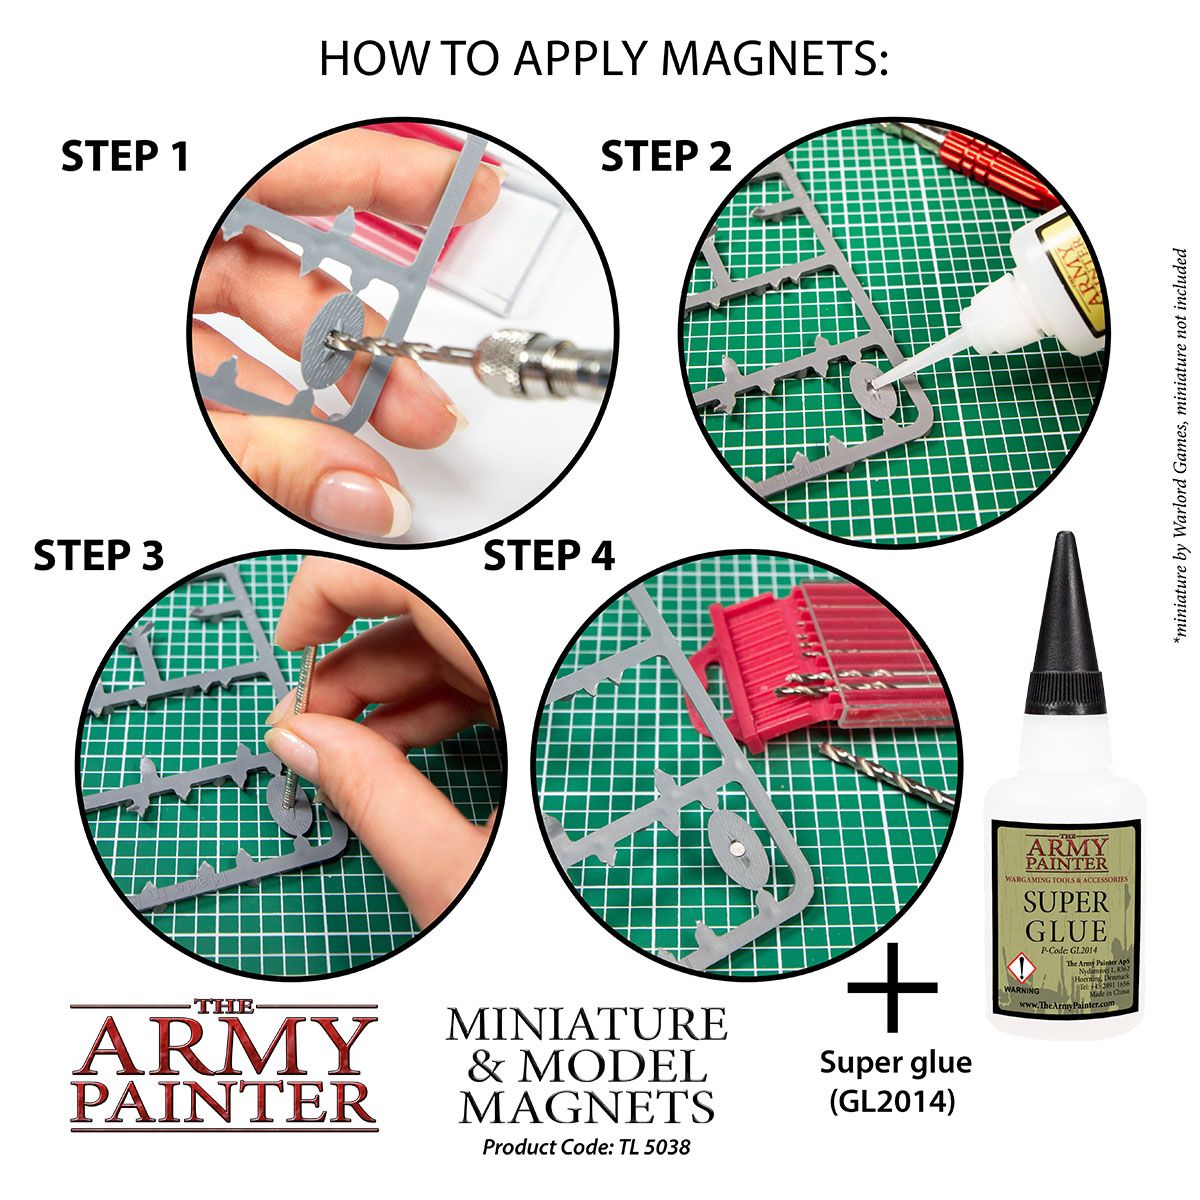 Miniature &amp; Model Magnets (The Army Painter)